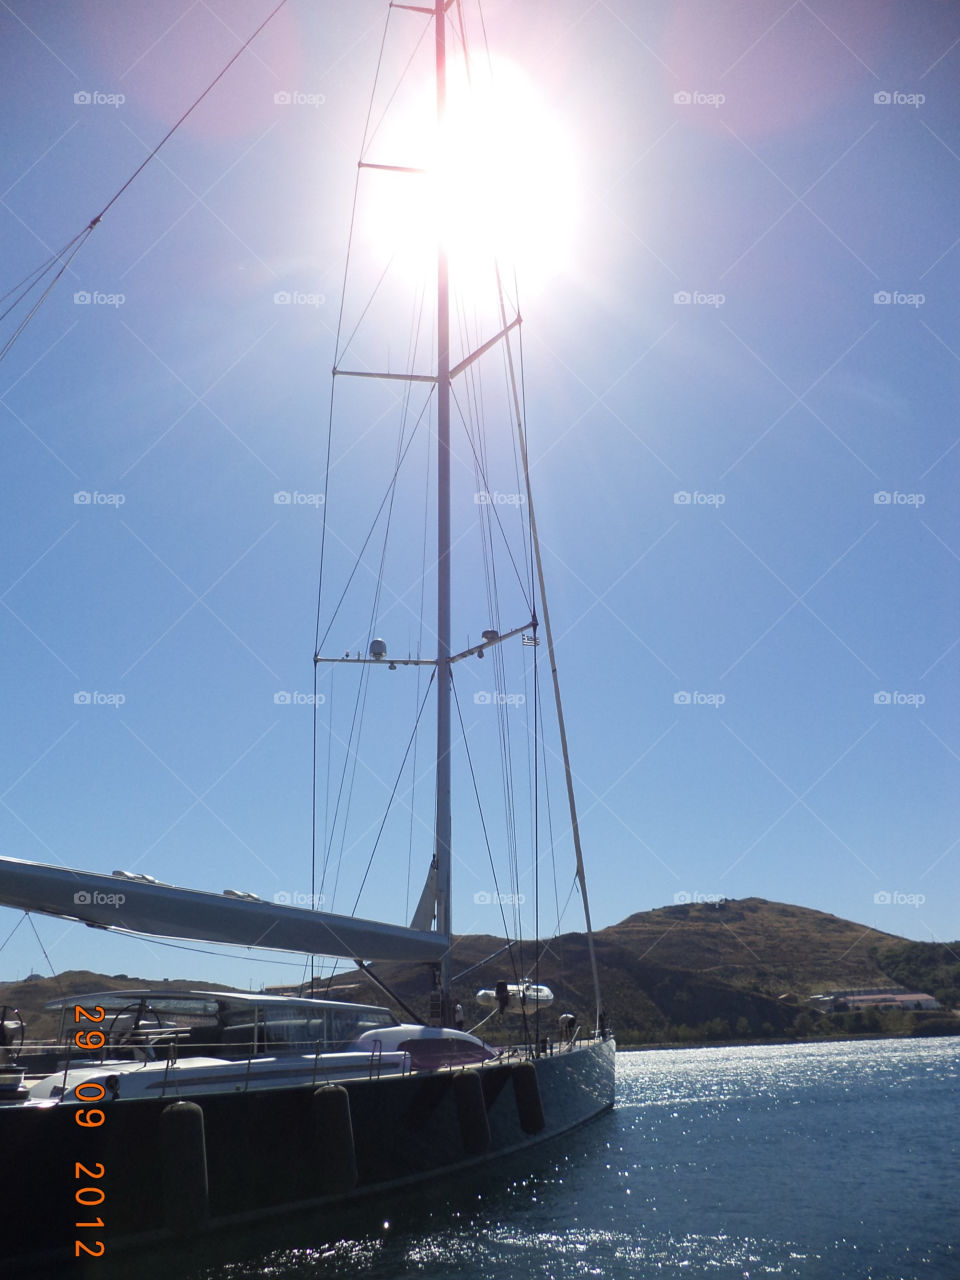 sailing lemnos sun by the sea by fgg